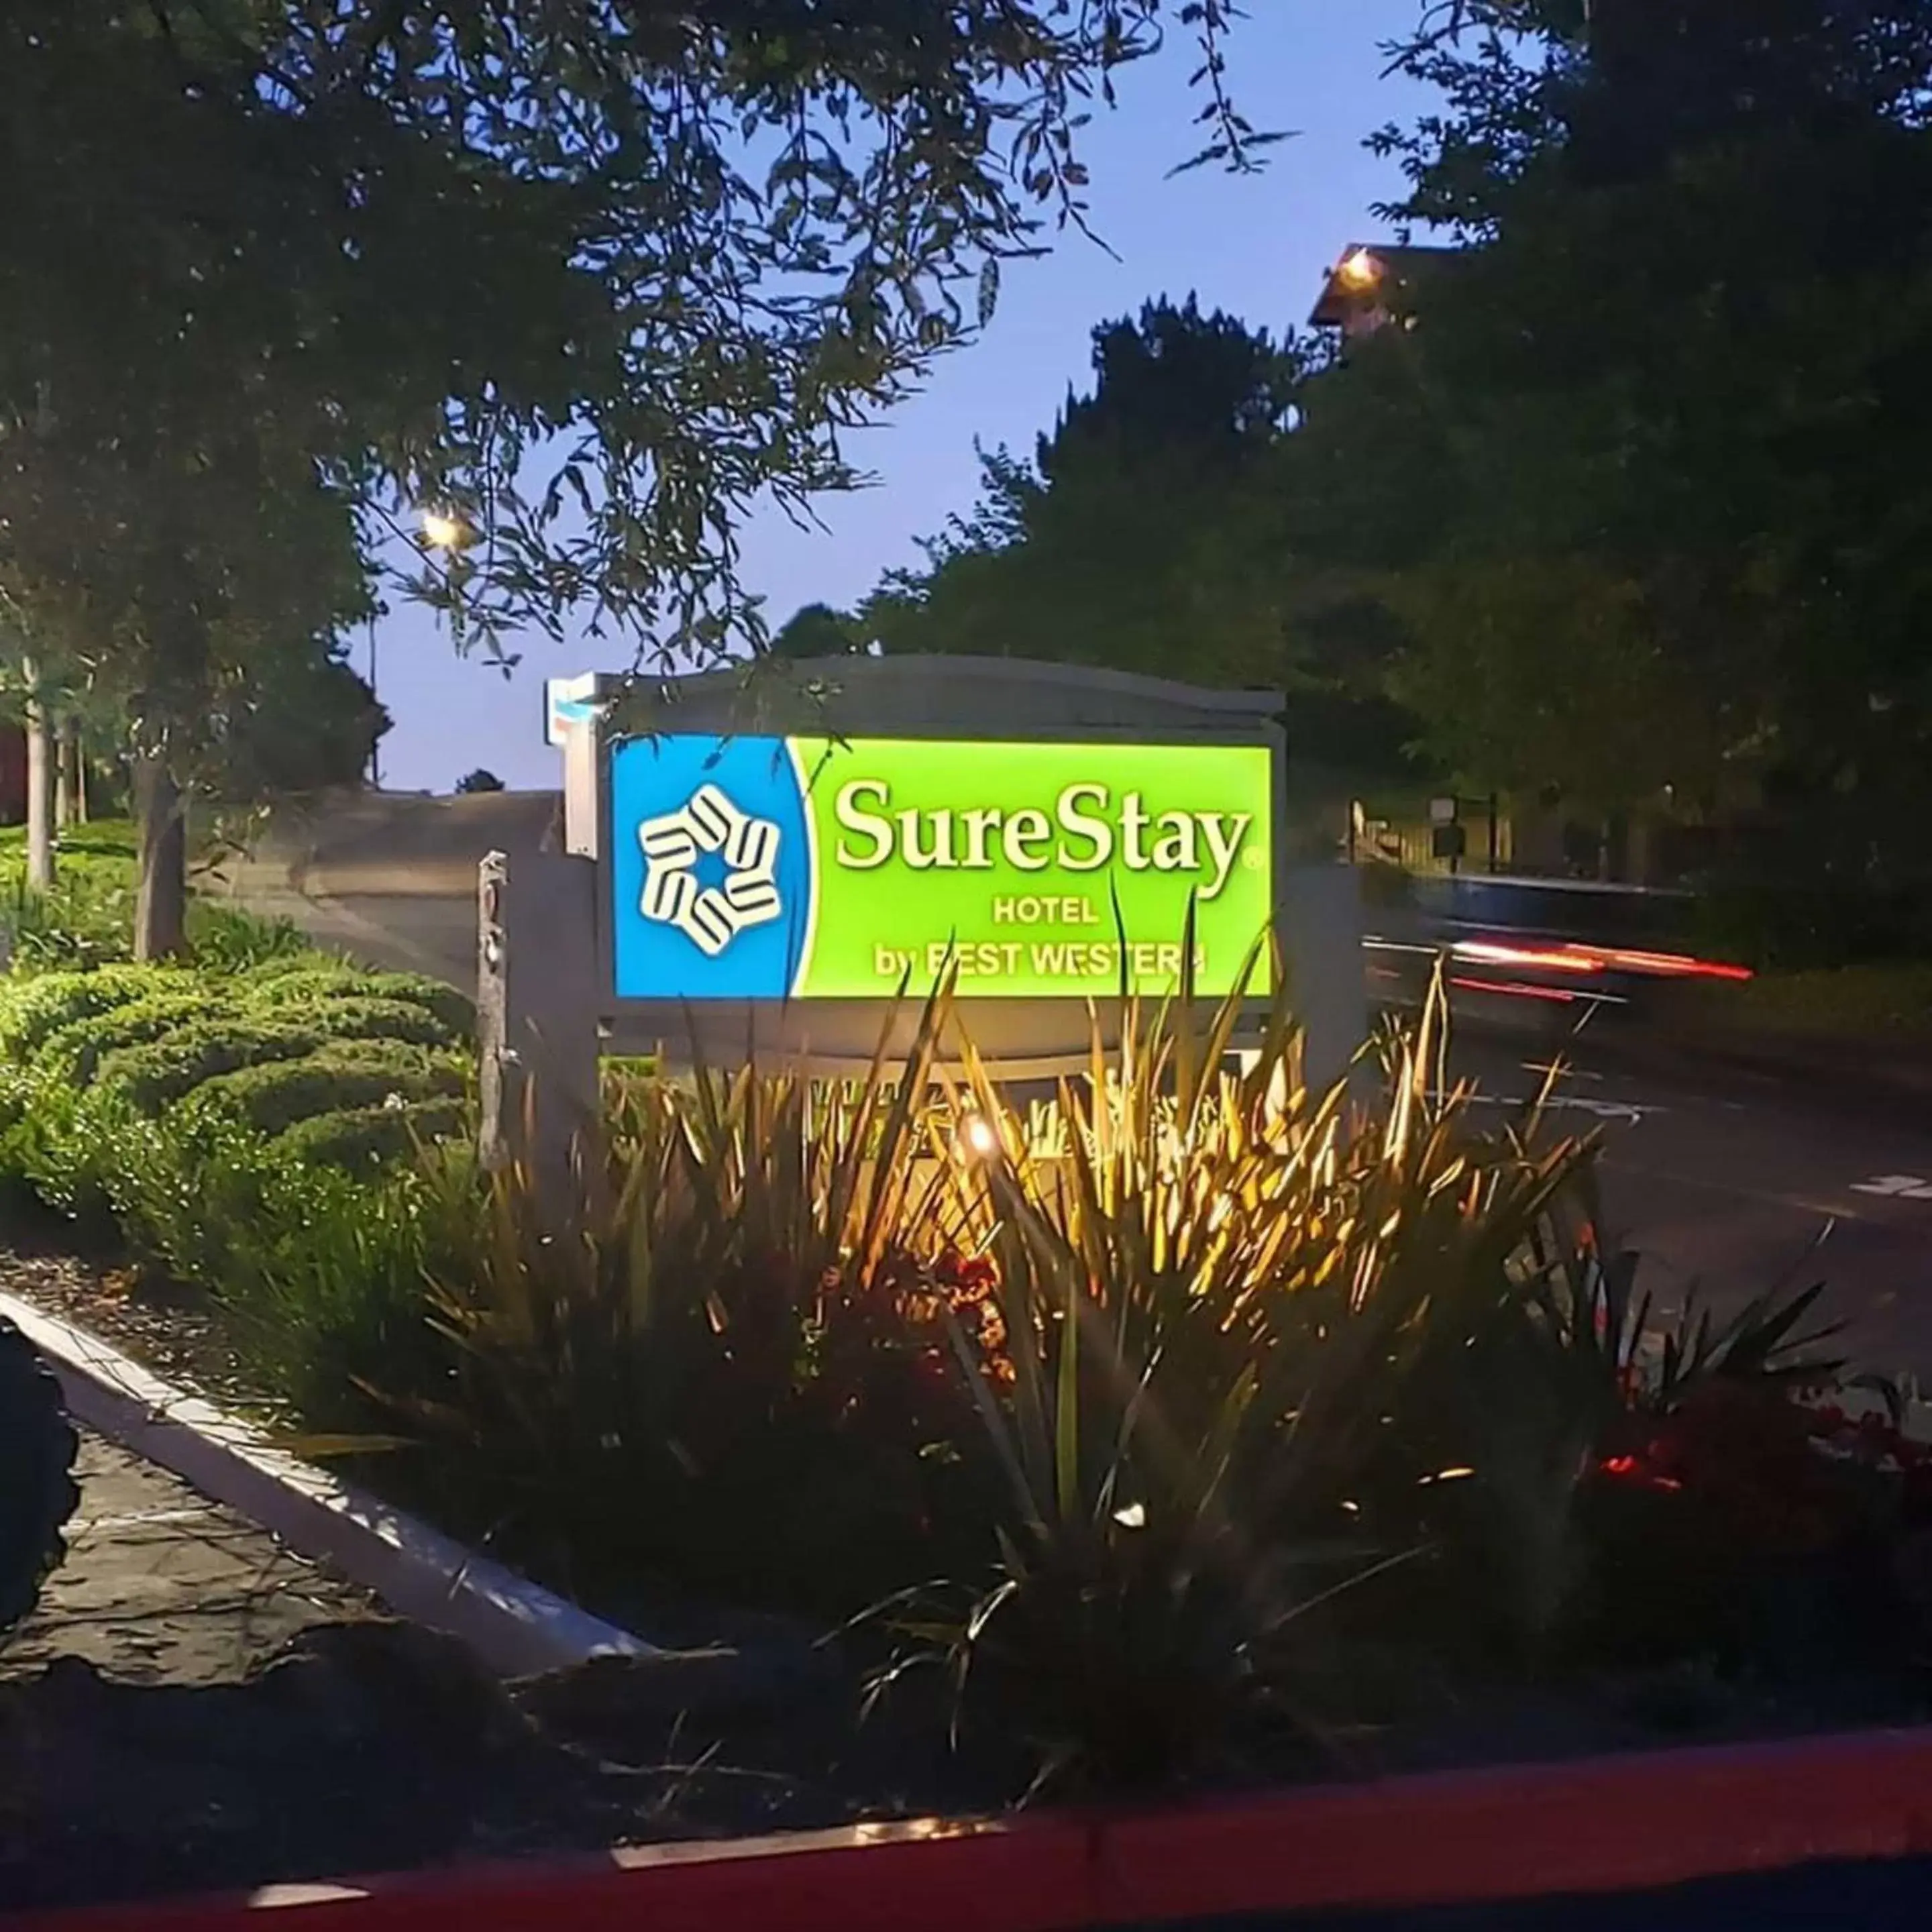 Property building, Property Logo/Sign in SureStay Hotel by Best Western Vallejo Napa Valley